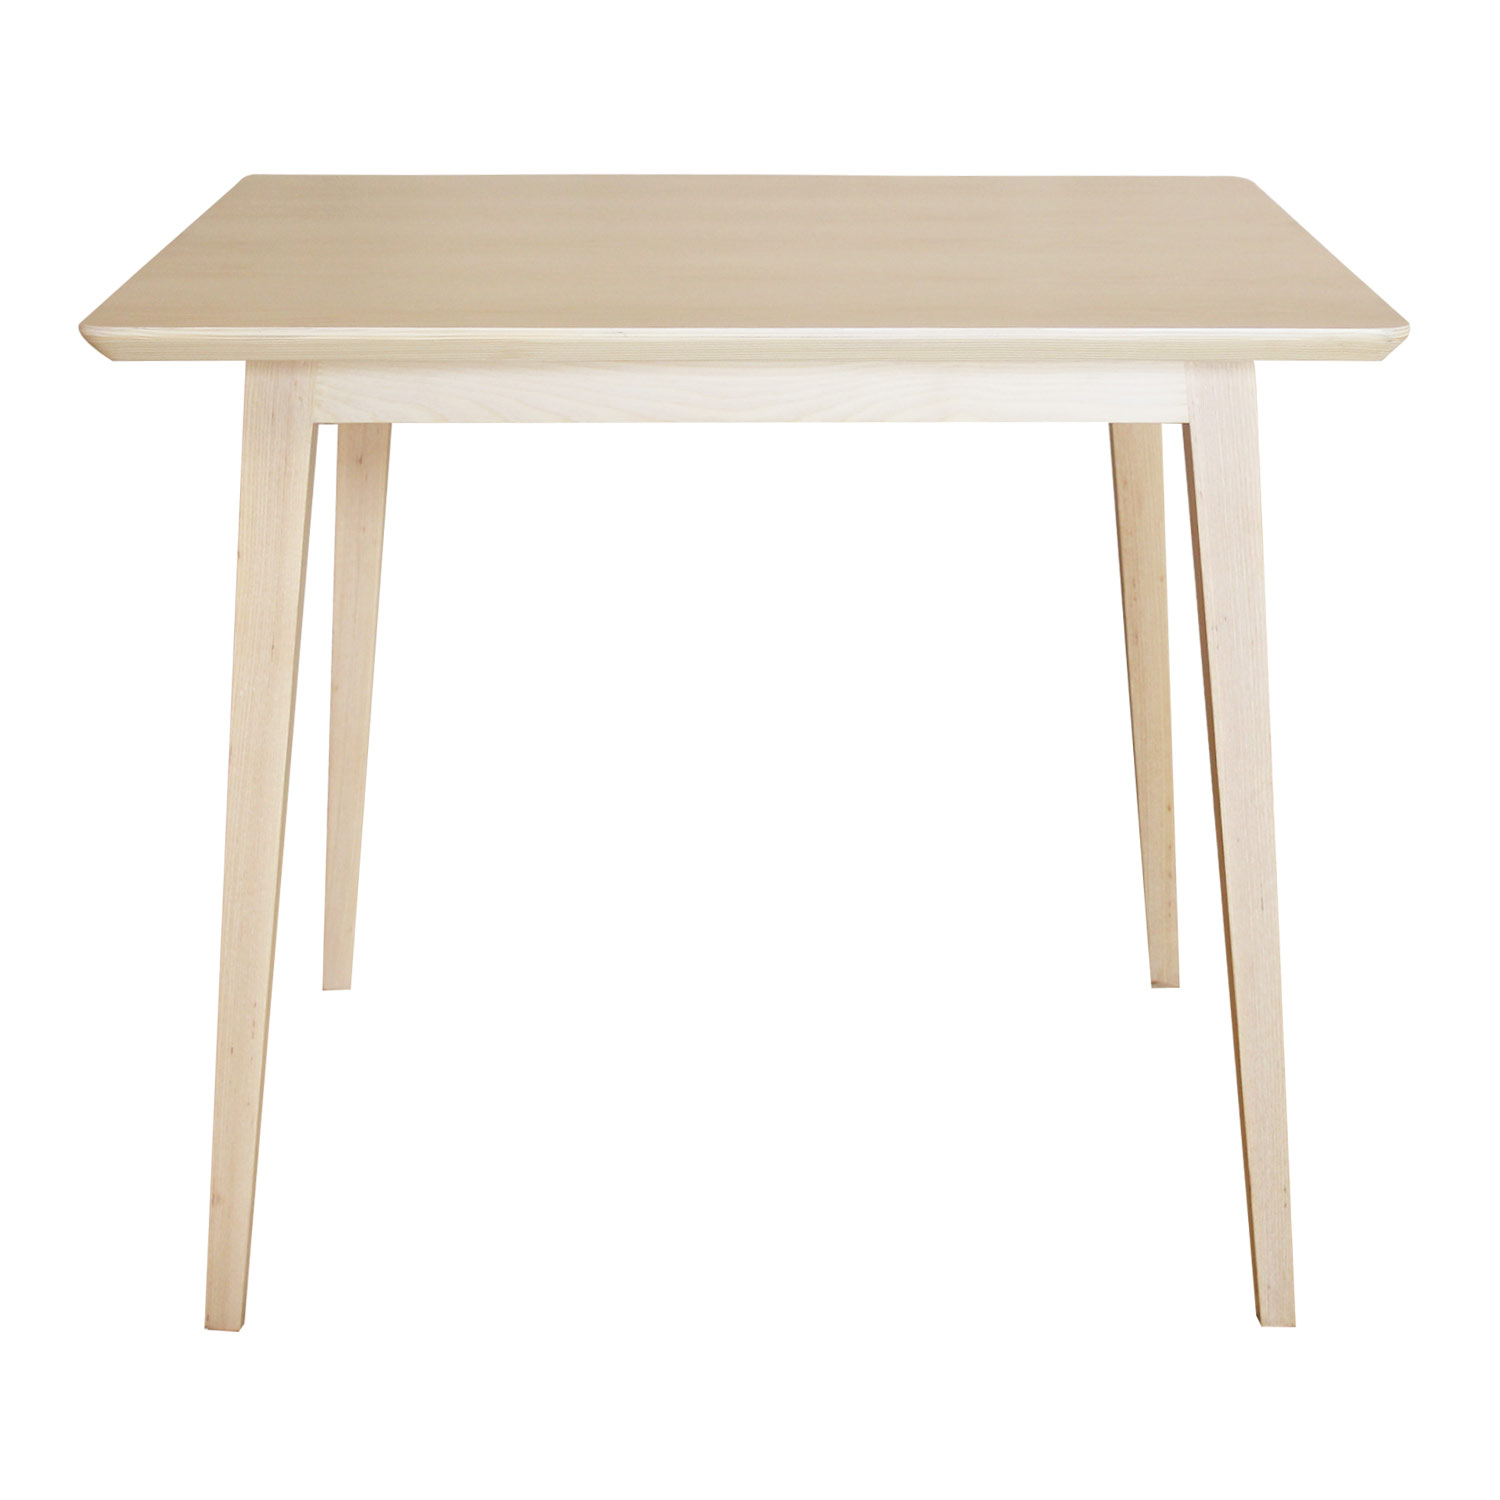 Muko Light Four Seater Dining Table